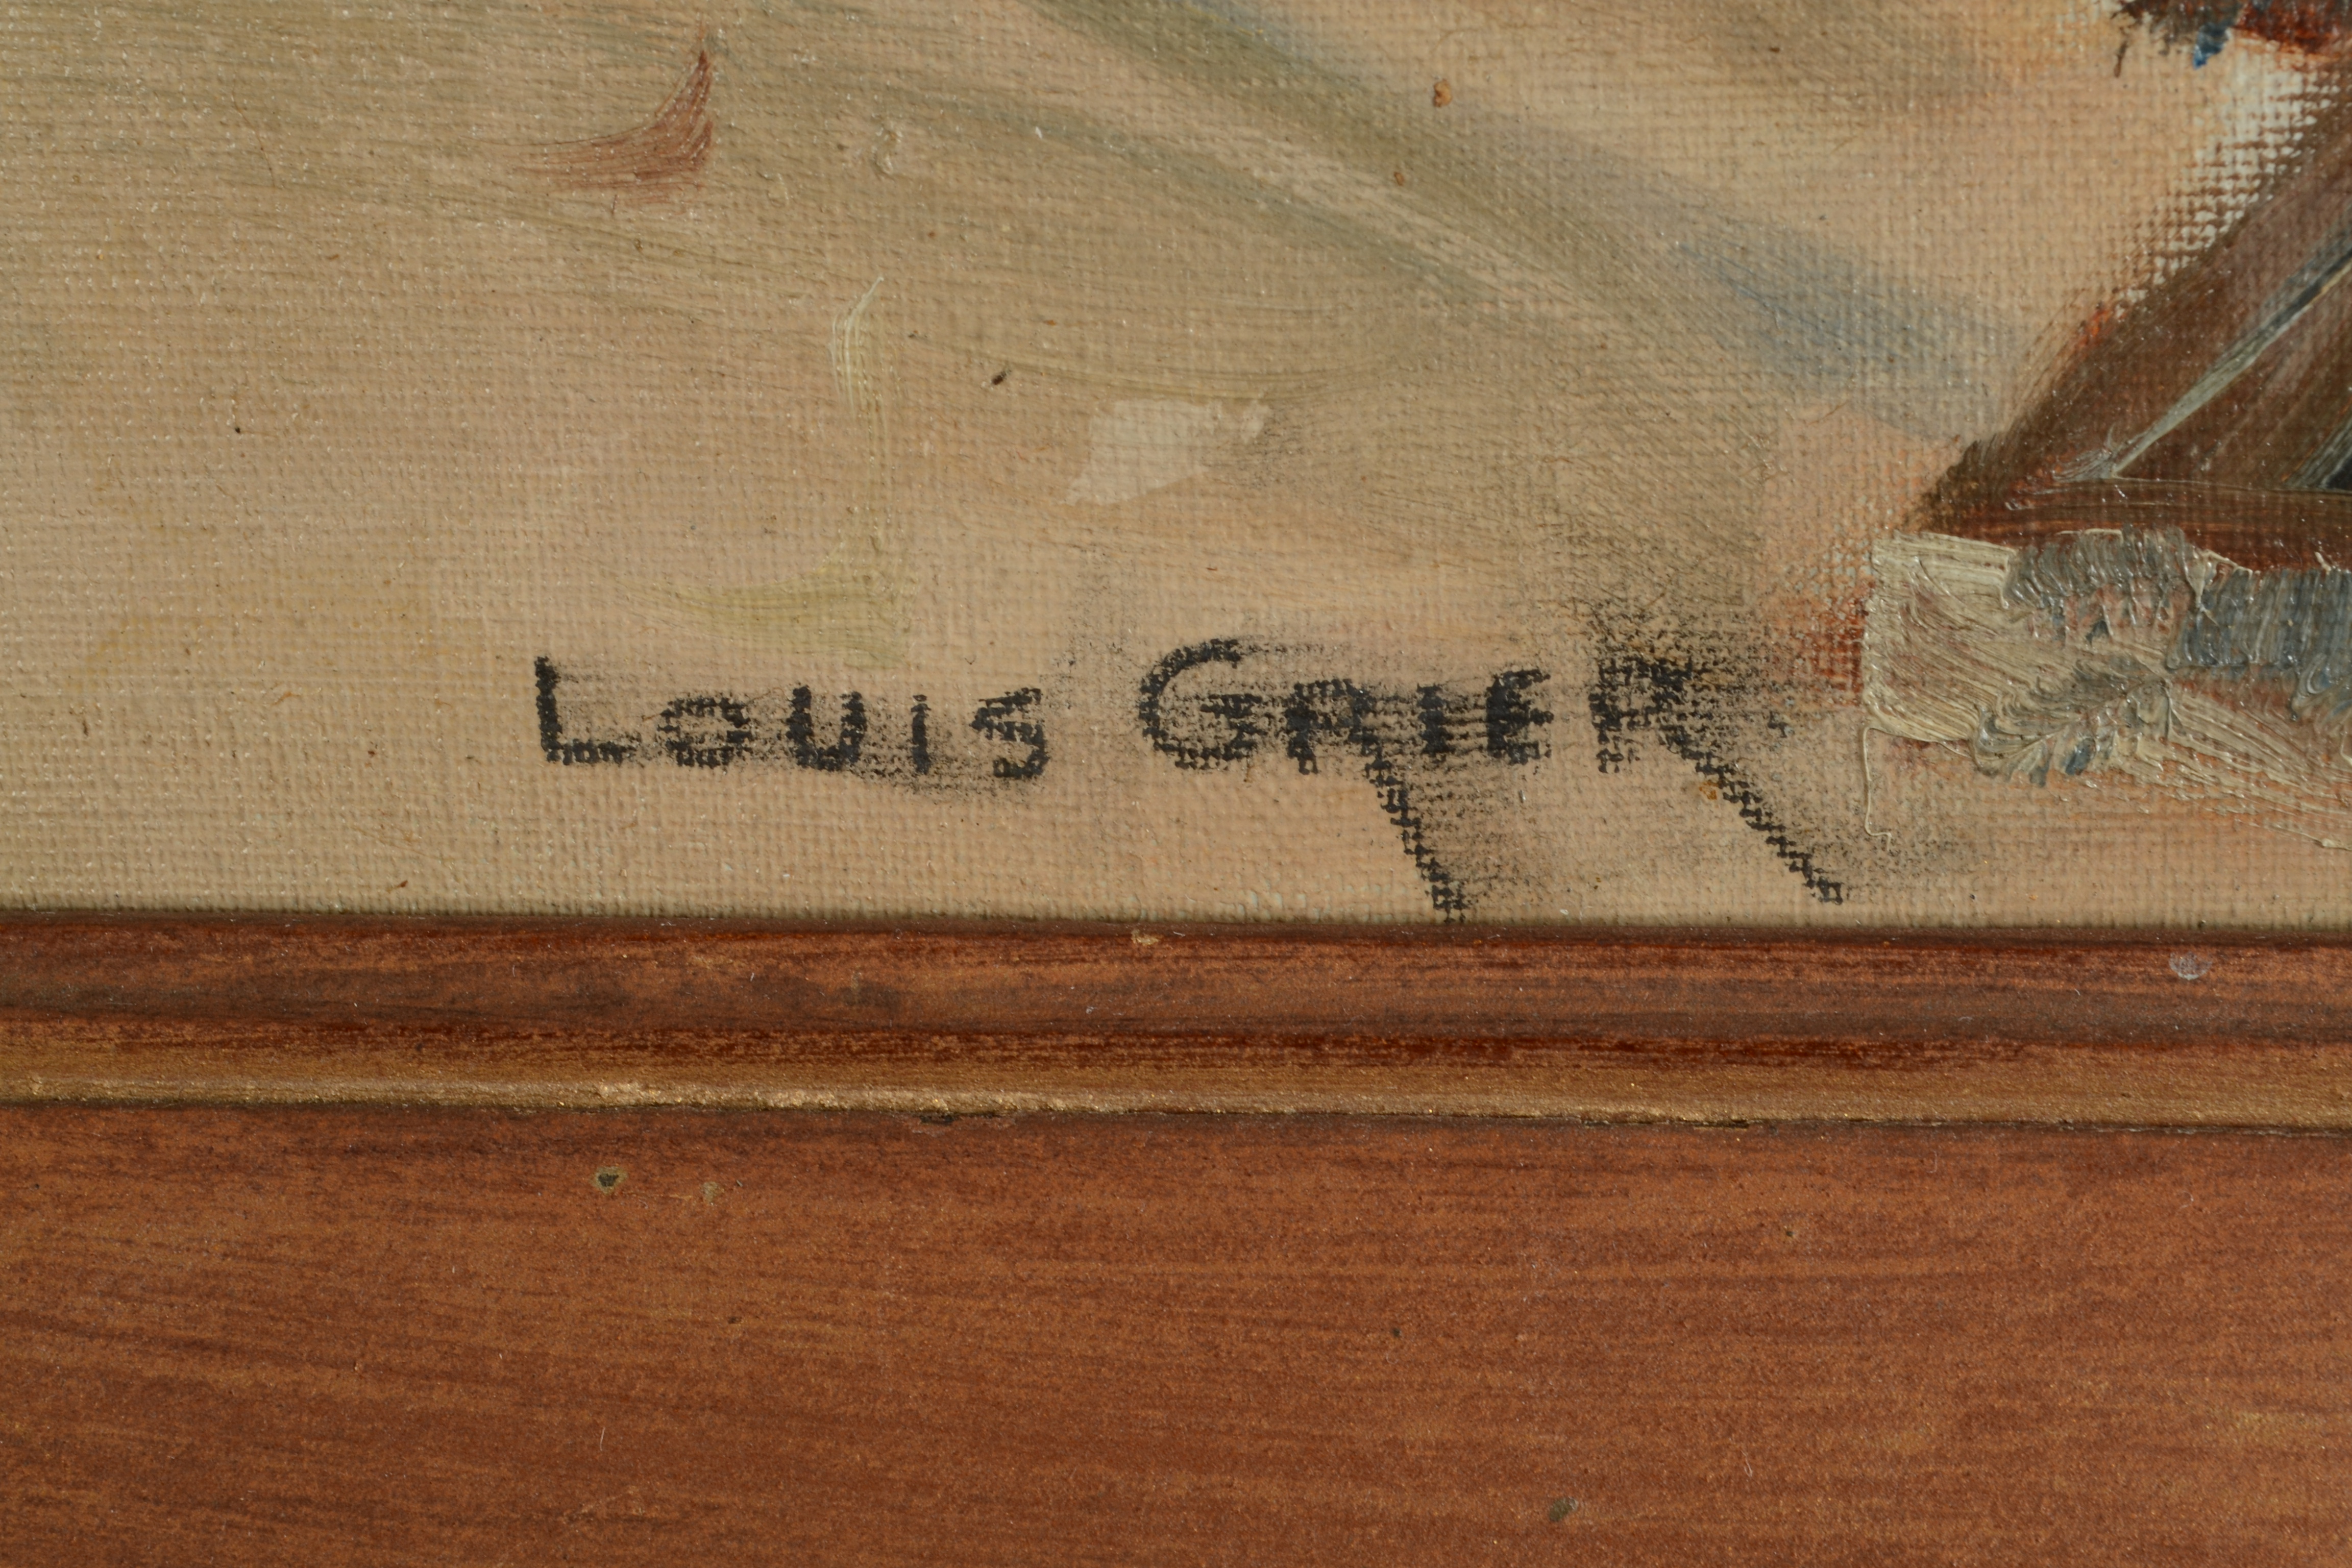 LOUIS MONRO GRIER A Street View Oil on canvas Signed 46 x 36 cm - Image 3 of 3